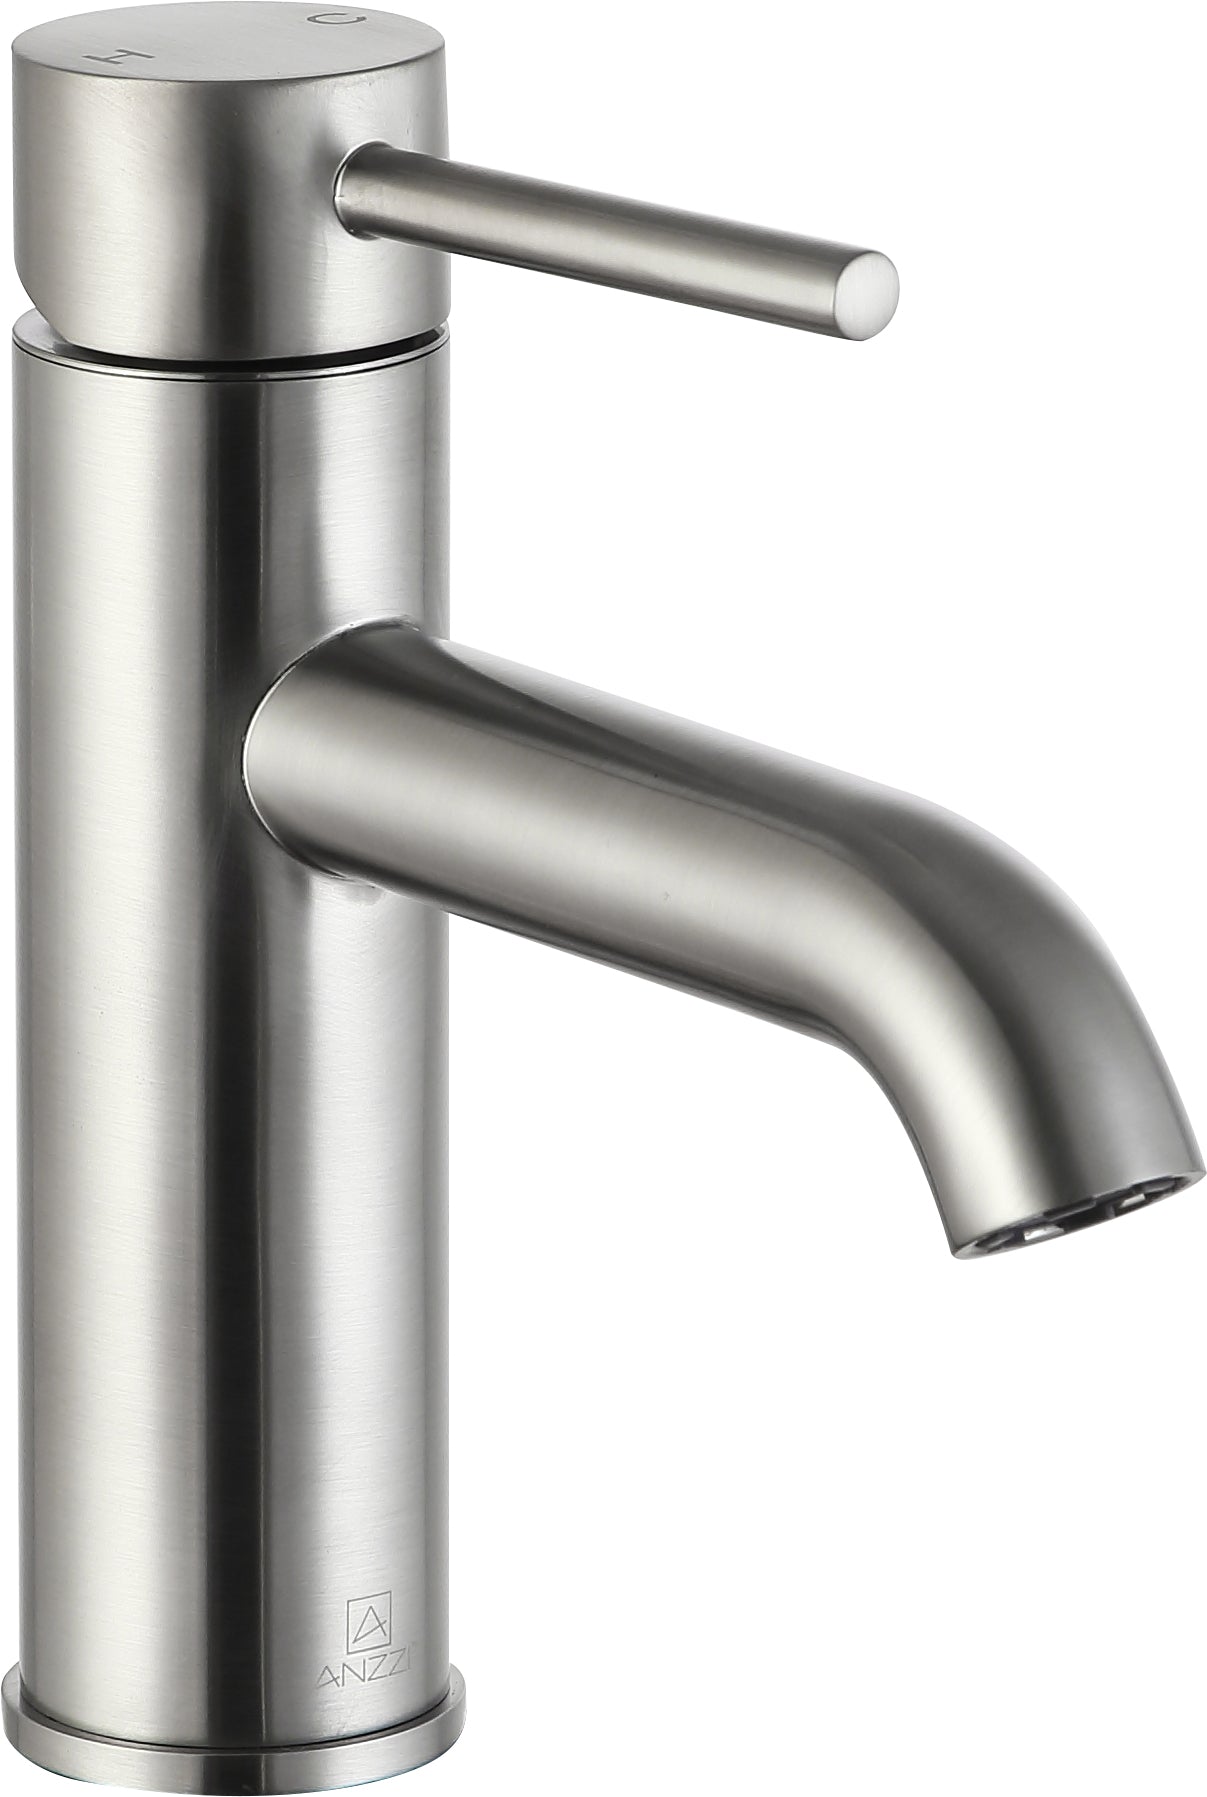 L-AZ107BN - Valle Single Hole Single Handle Bathroom Faucet in Brushed Nickel